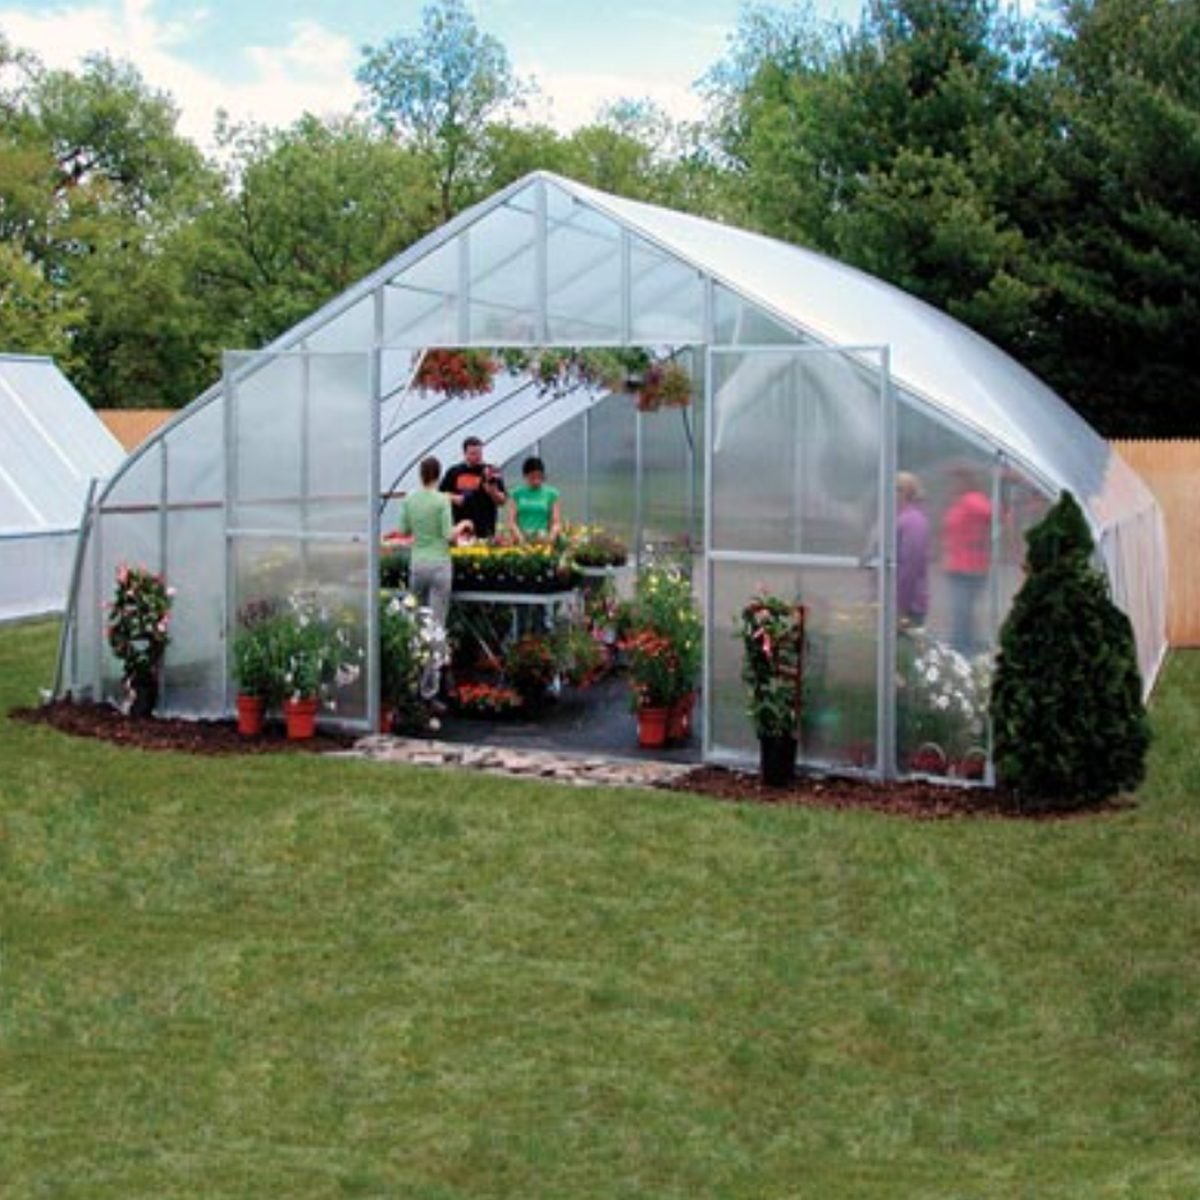 Growspan Gothic Pro Greenhouse Film & Roll Up Sides Ecomm Growerssupply.com